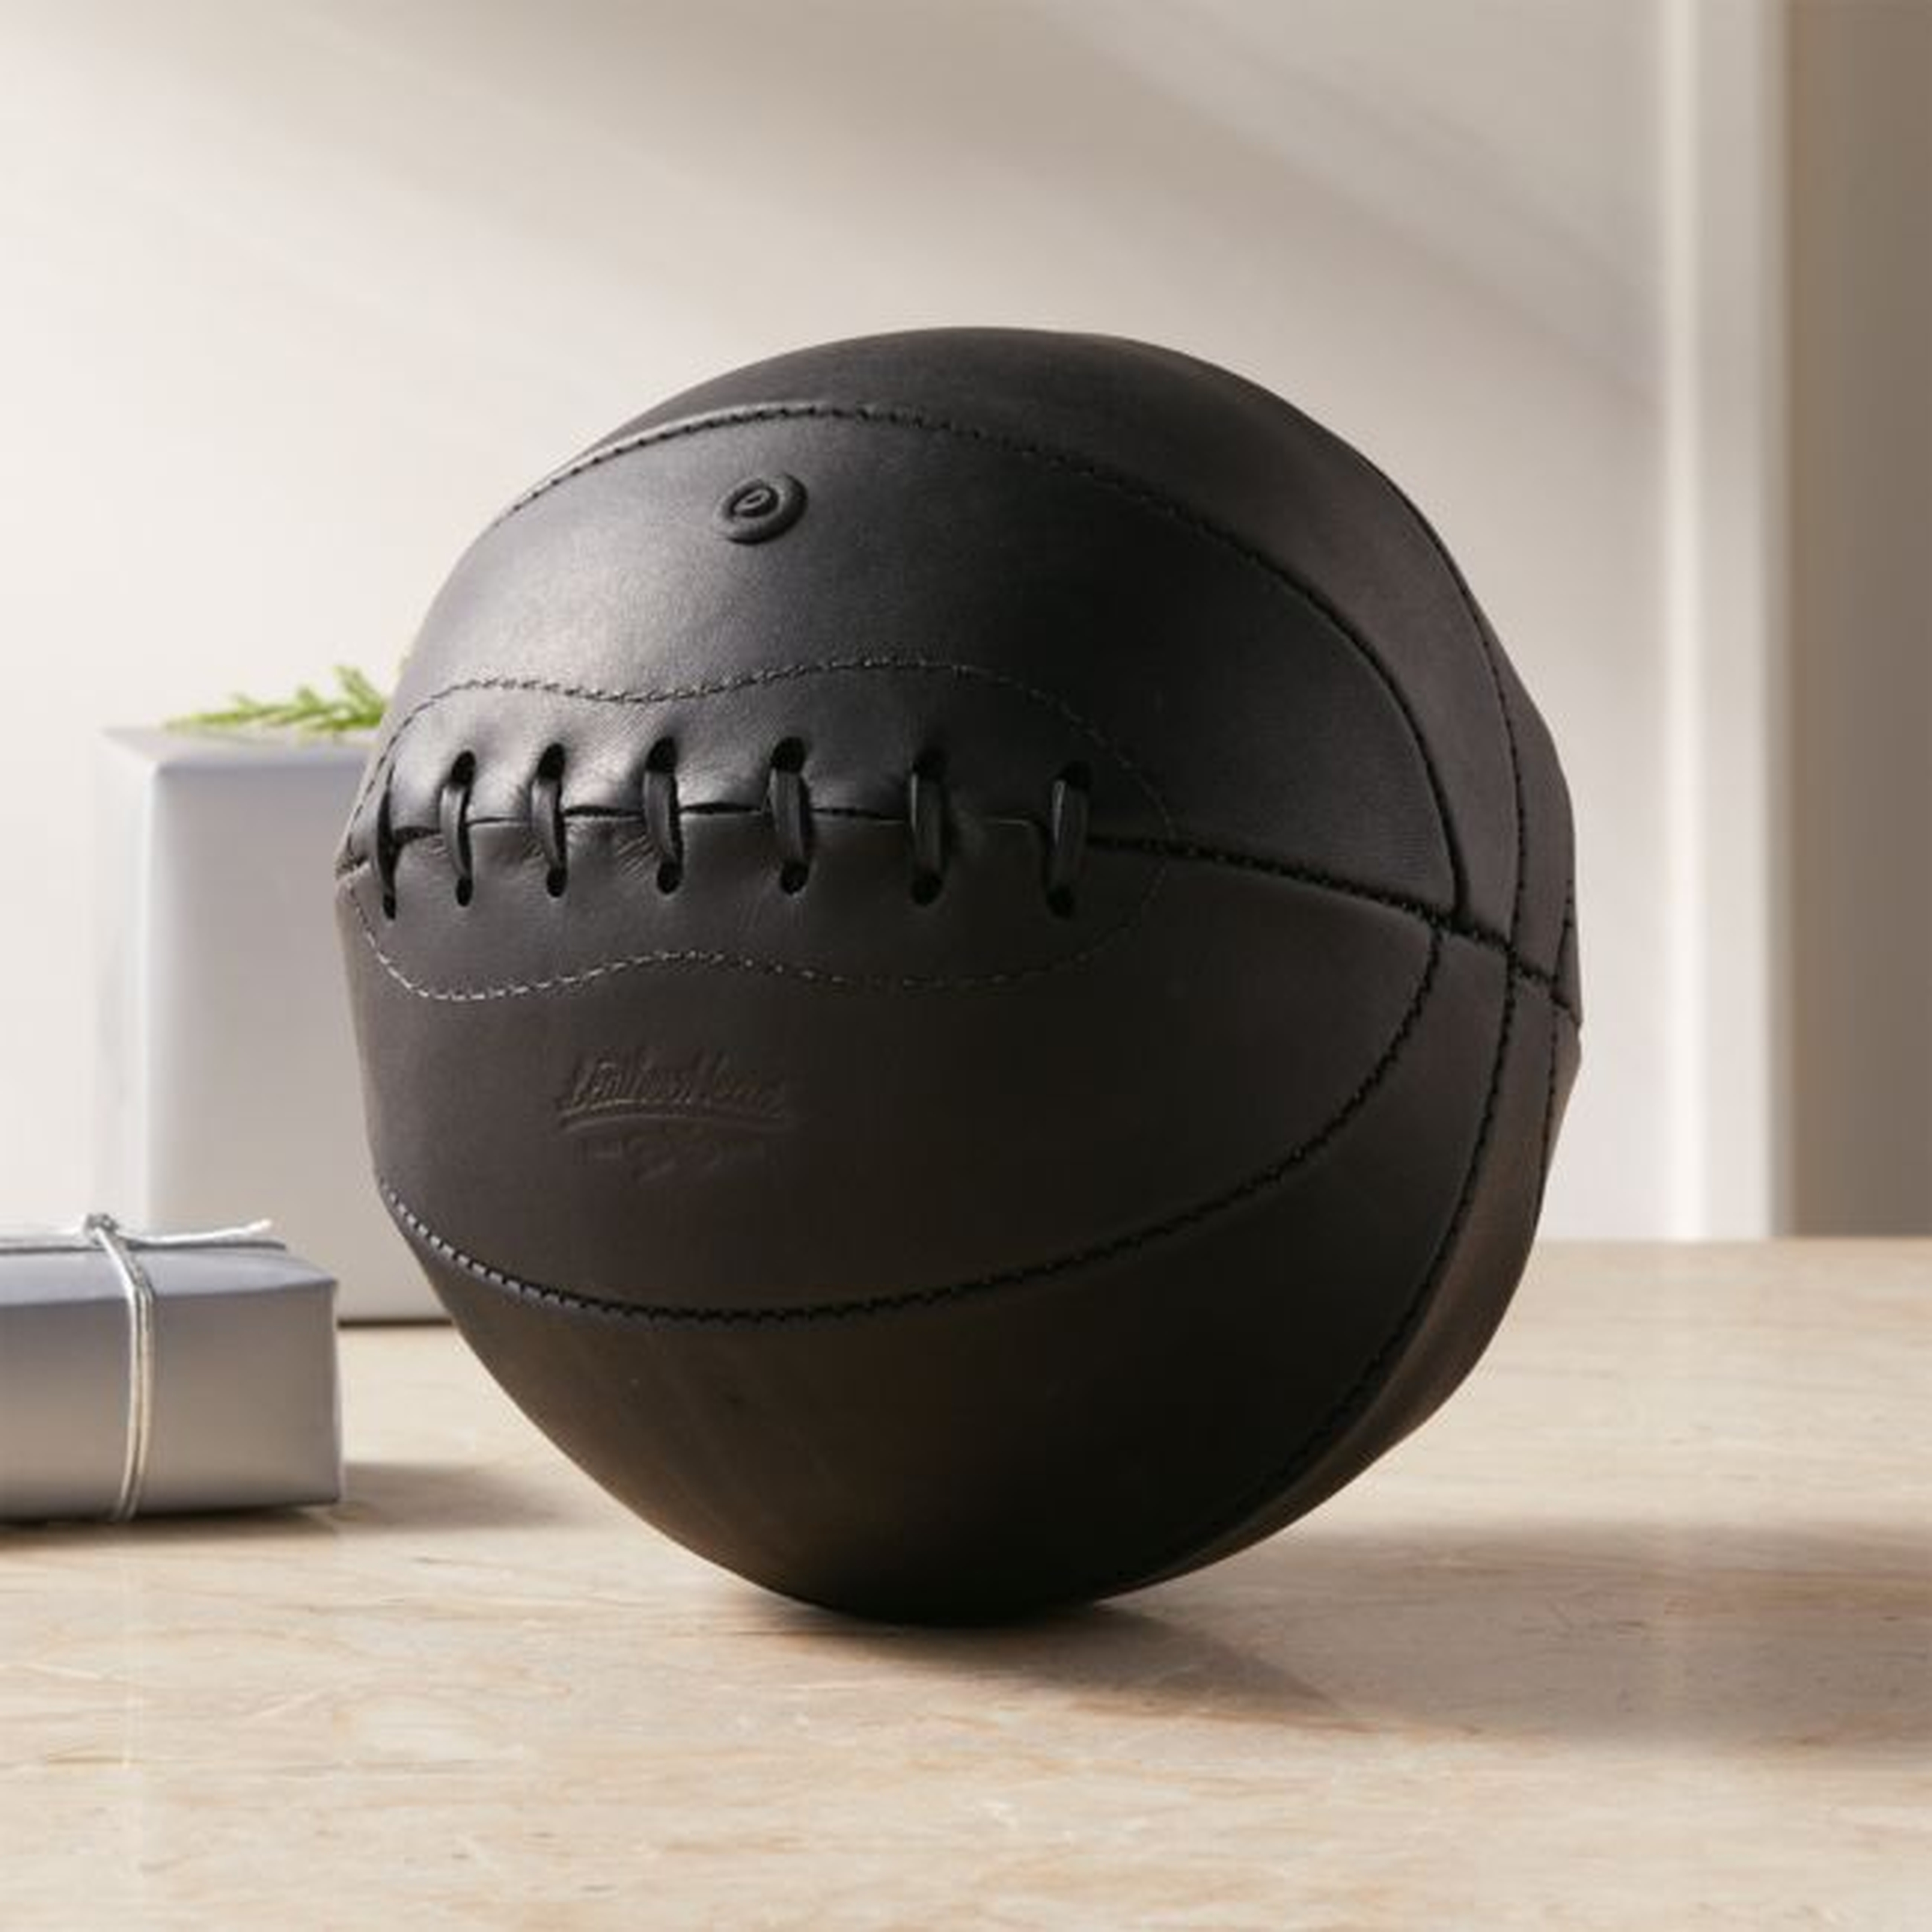 Leather Head Small Black Leather Basketball - CB2